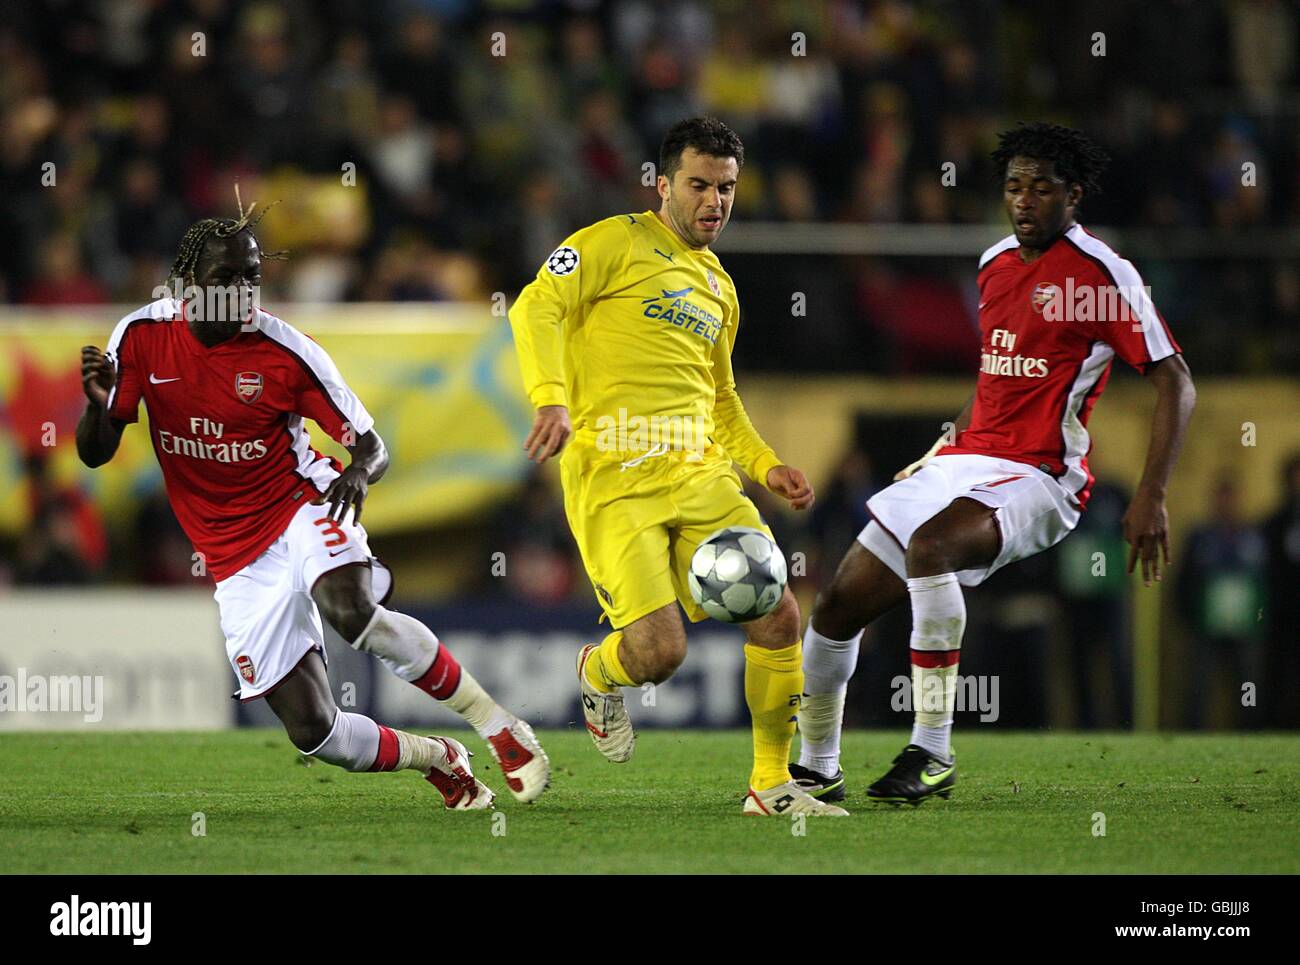 Soccer - UEFA Champions League - Quarter Final - First Leg - Villarreal v Arsenal - Estadio El Madrigal. Arsenal's Bacary Sagna (left) and Alexandre Song Billong (right) bettle for the ball with Villarreal's Giuseppe Rossi Stock Photo